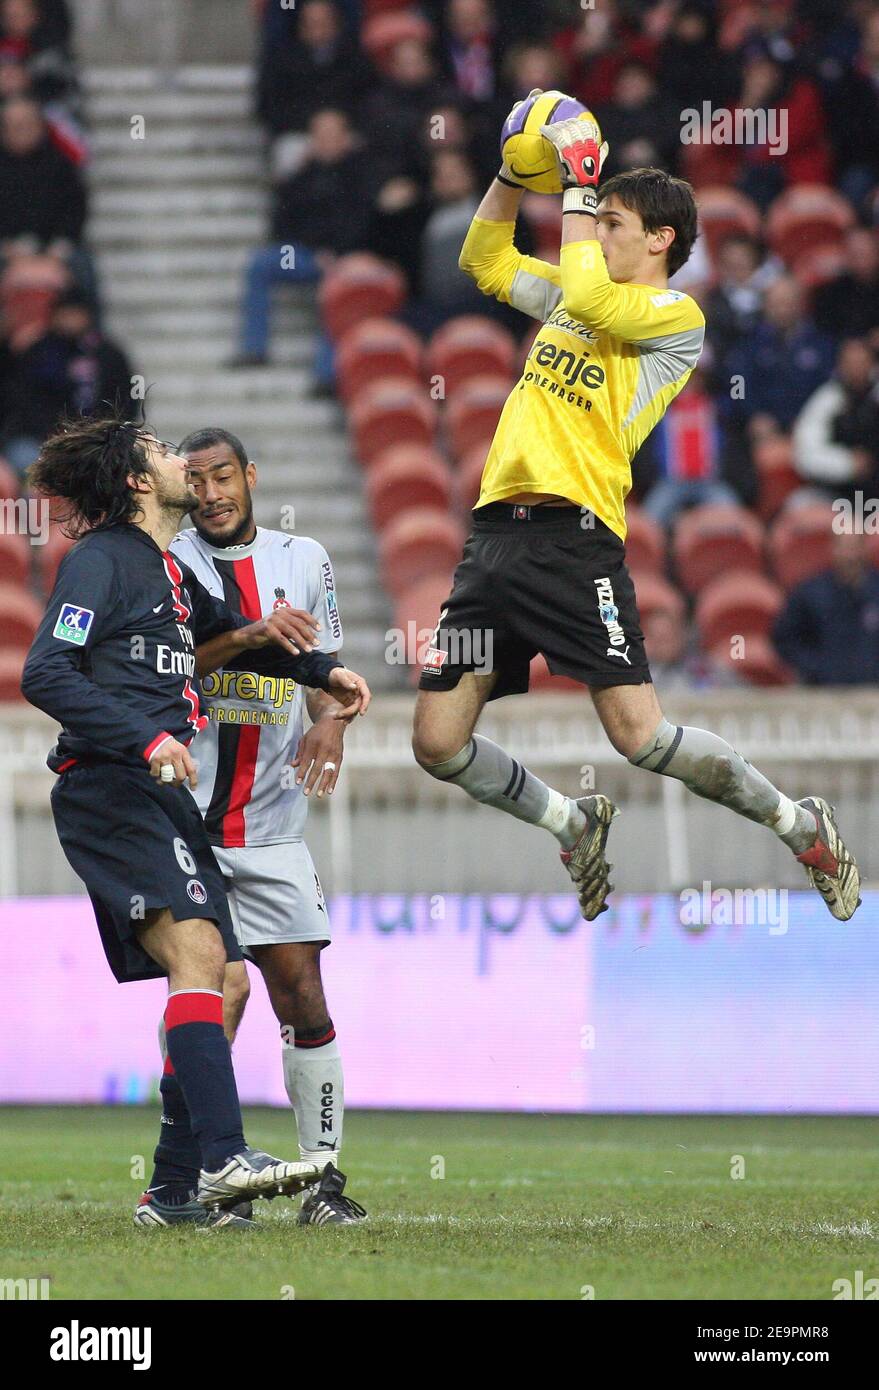 PSG's Mario Yepes and Nice's goalkeeper Hugo Lloris during the French first league football match, PSG vs Nice at 'Le parc des Princes' in Paris, France on December 17, 2006. The match ended in a 0-0 draw. Photo by Mehdi Taamallah/Cameleon/ABACAPRESS.COM Stock Photo